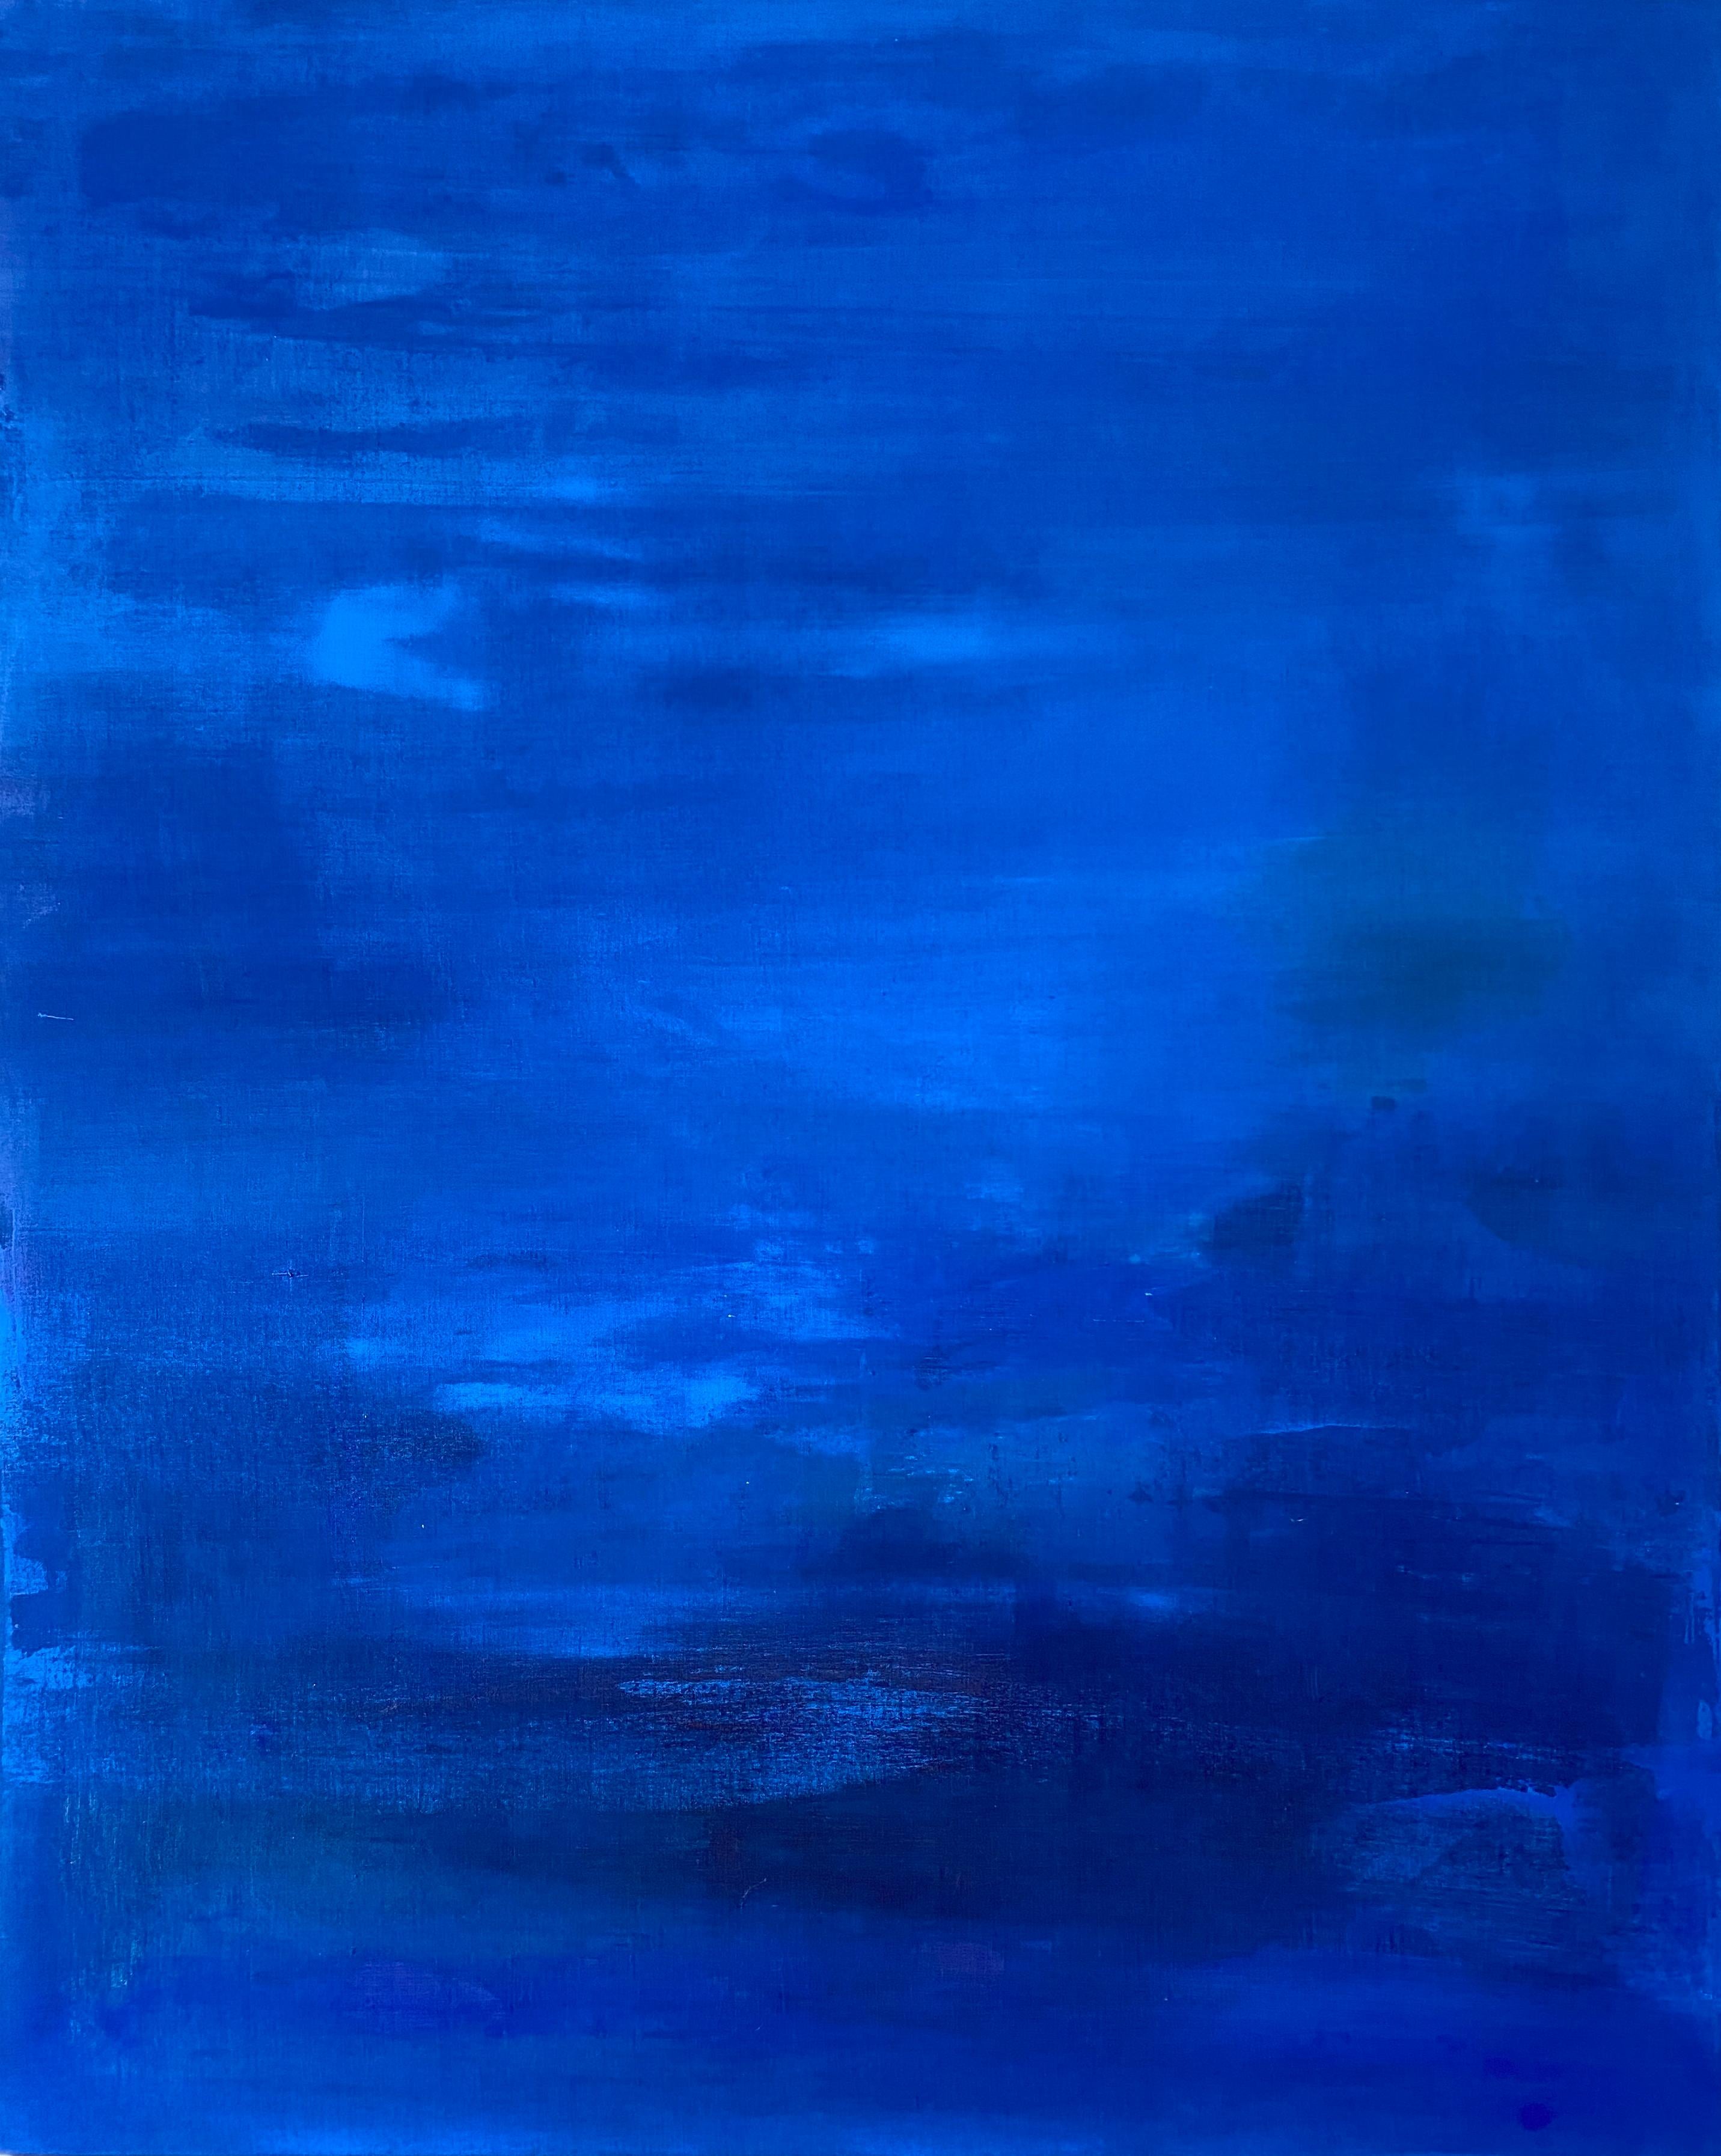 Kathleen Rhee Abstract Painting - Big Blue cobalt large scale minimalist abstract painting statement artwork